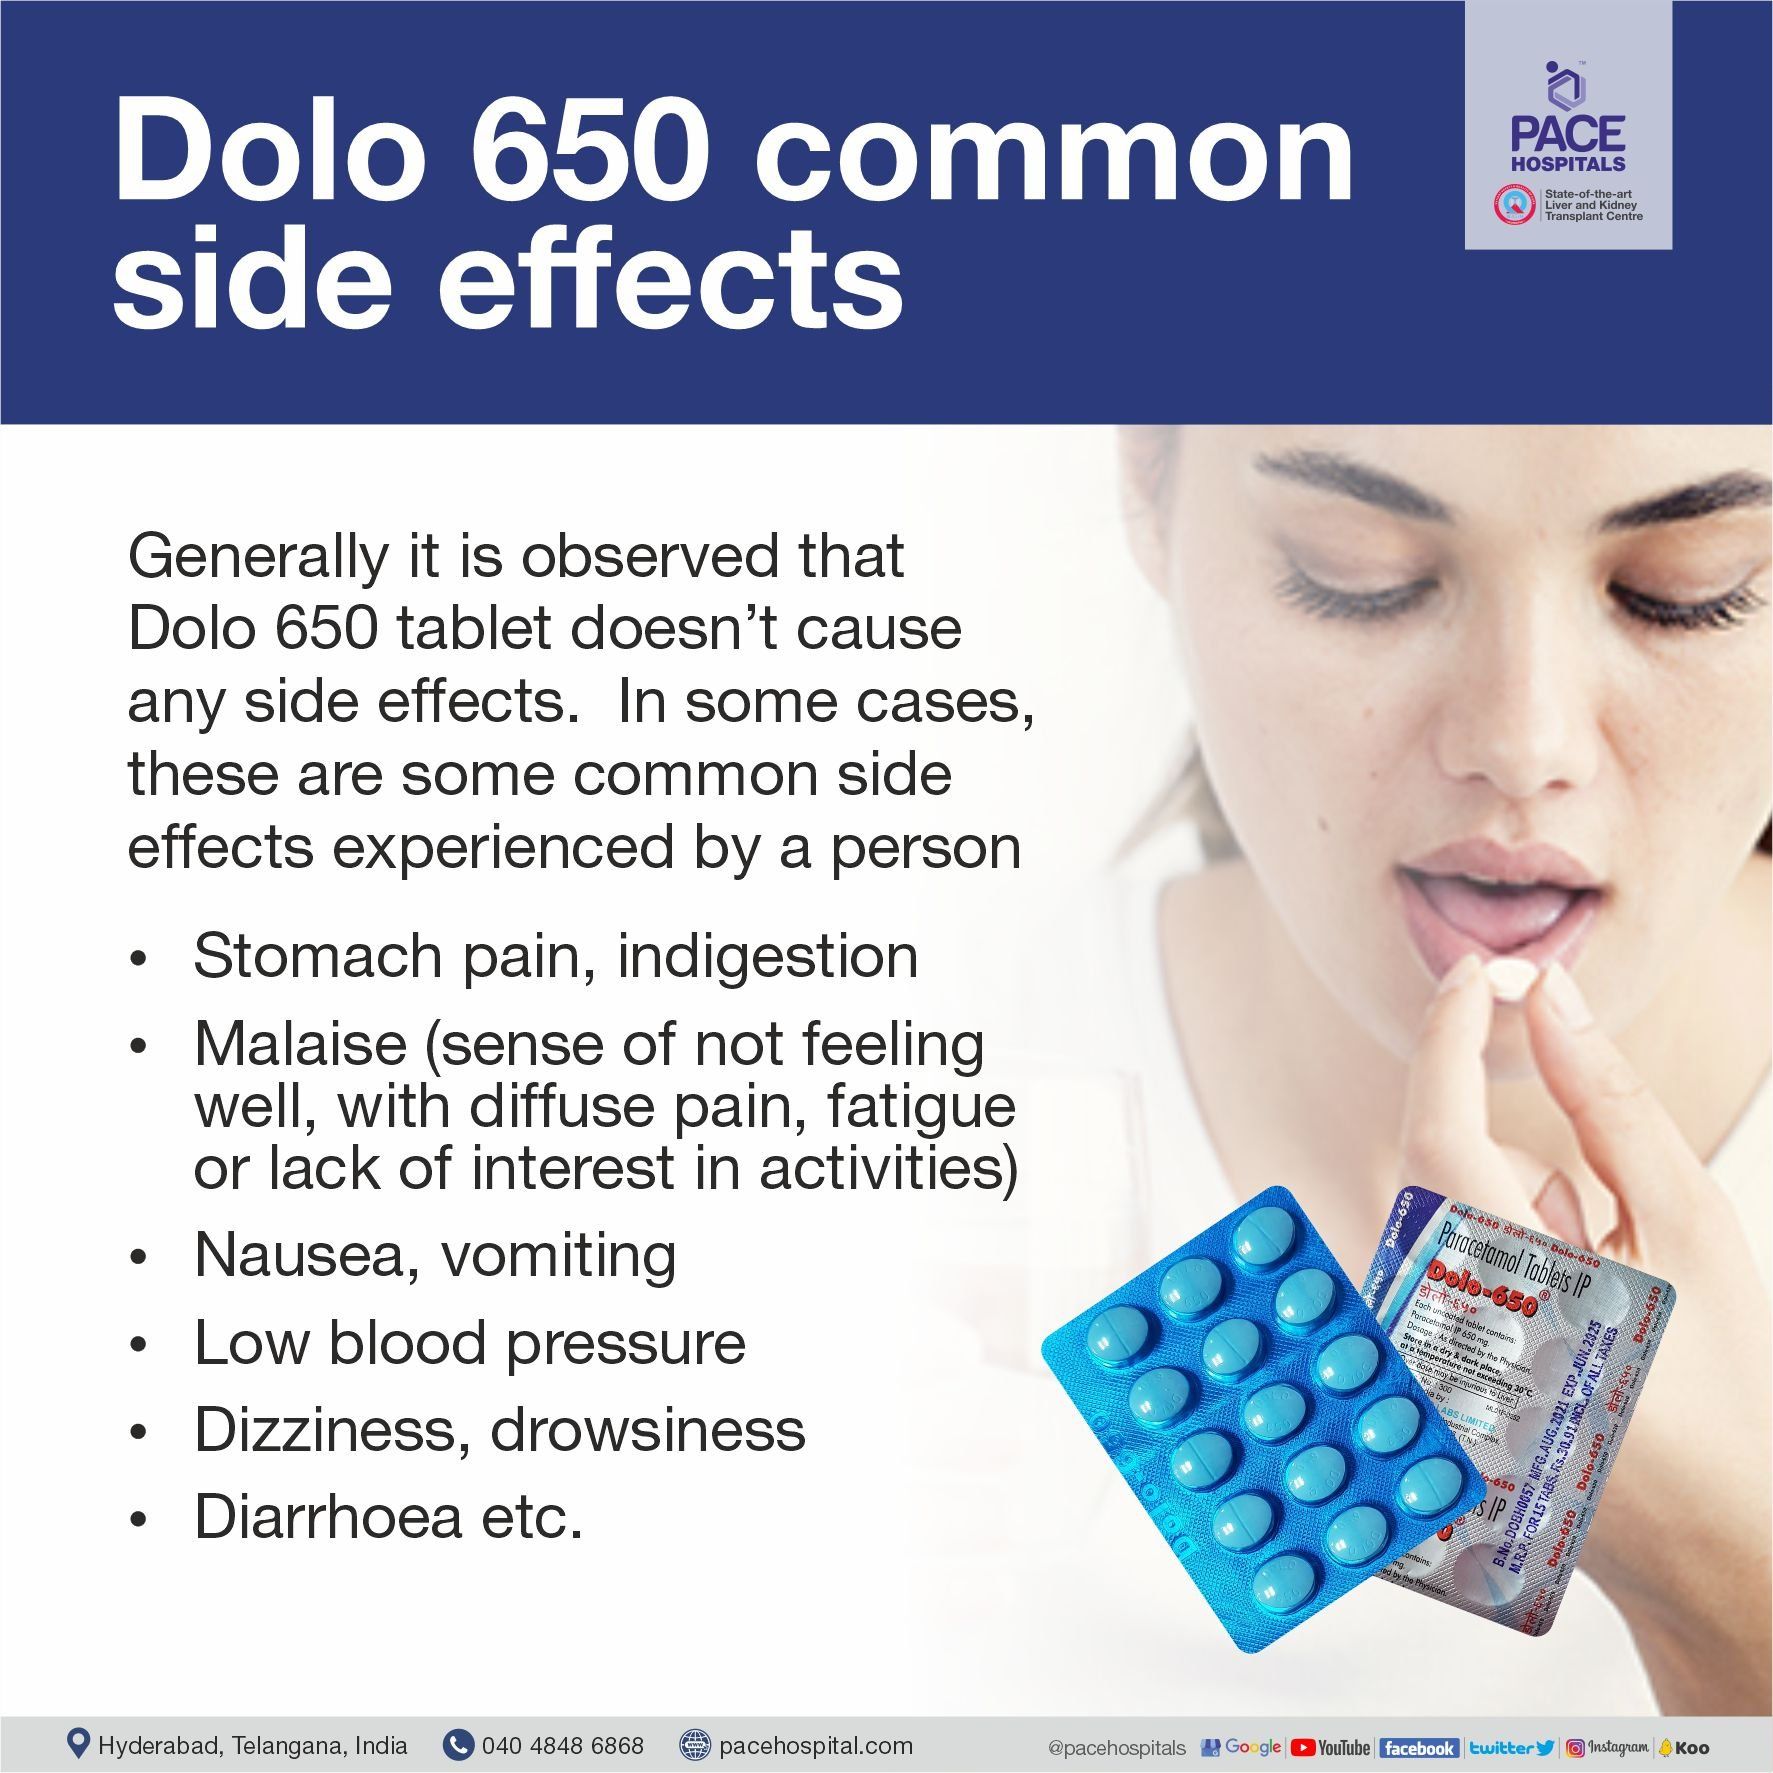 Common side effects of Dolo 650